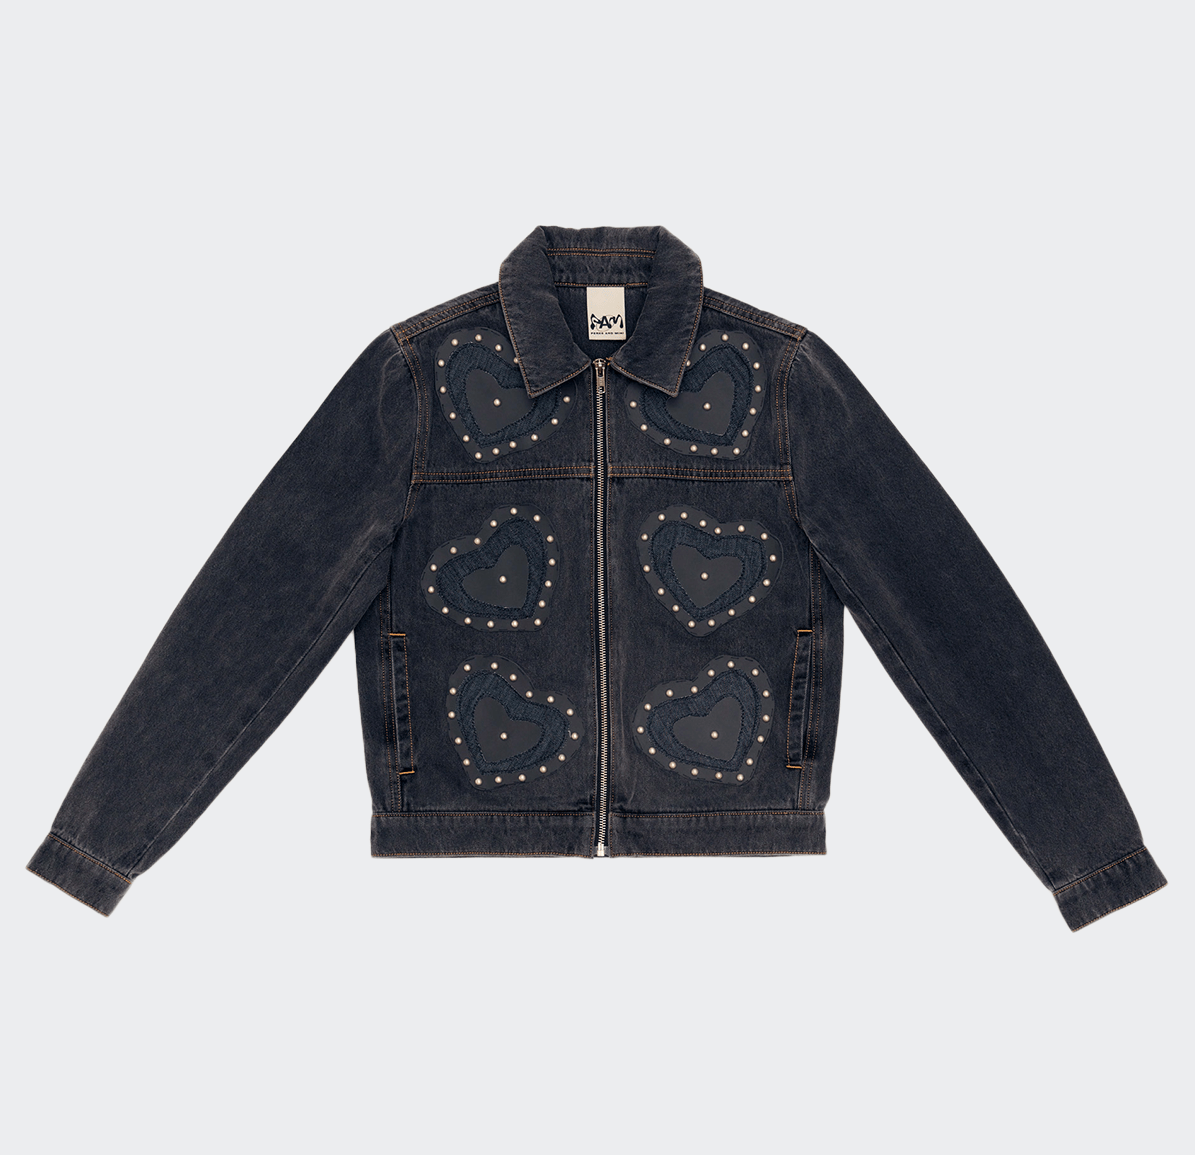 Perks And Mini Hearts Patch Denim Jacket - Black Wash - P.A.M. - State Of Play